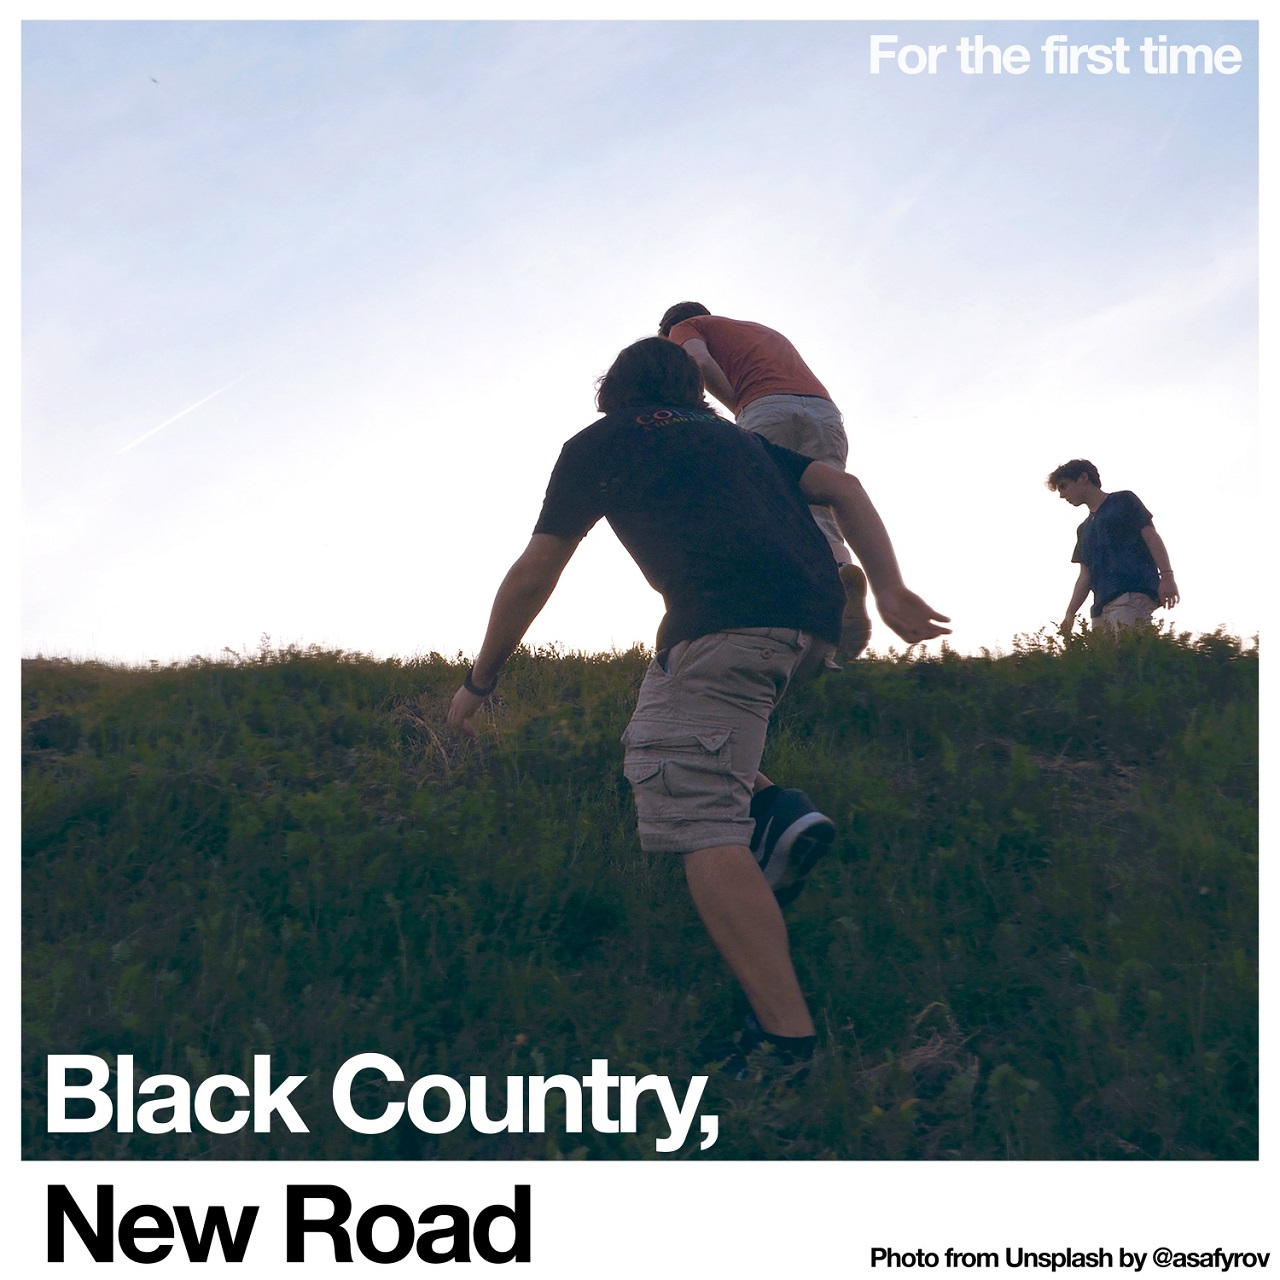 Black Country, New Road Albumcover "For the first time"